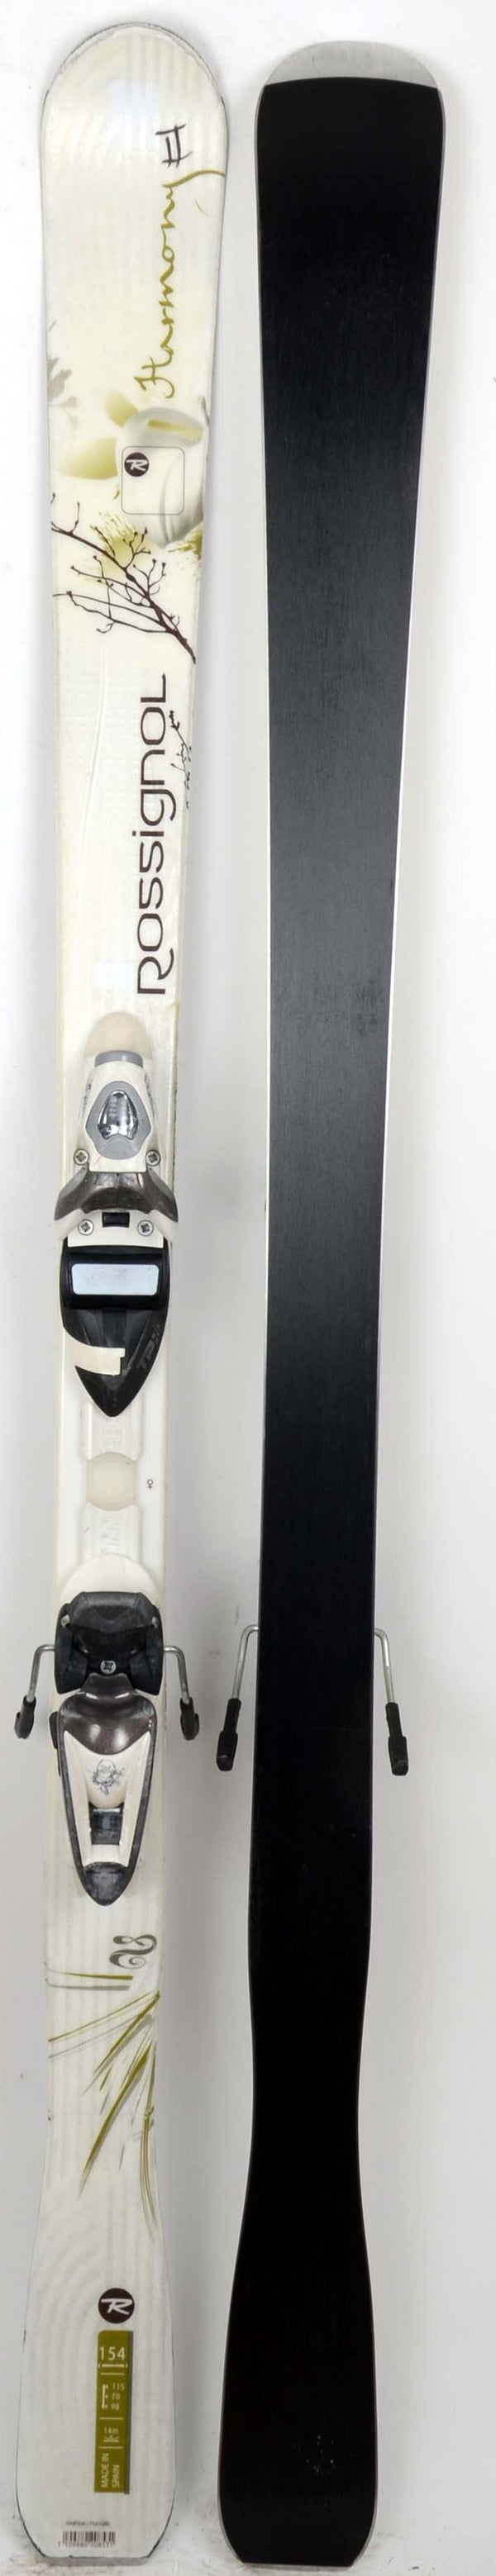 Rossignol HARMONY 2 - Skis d'occasion